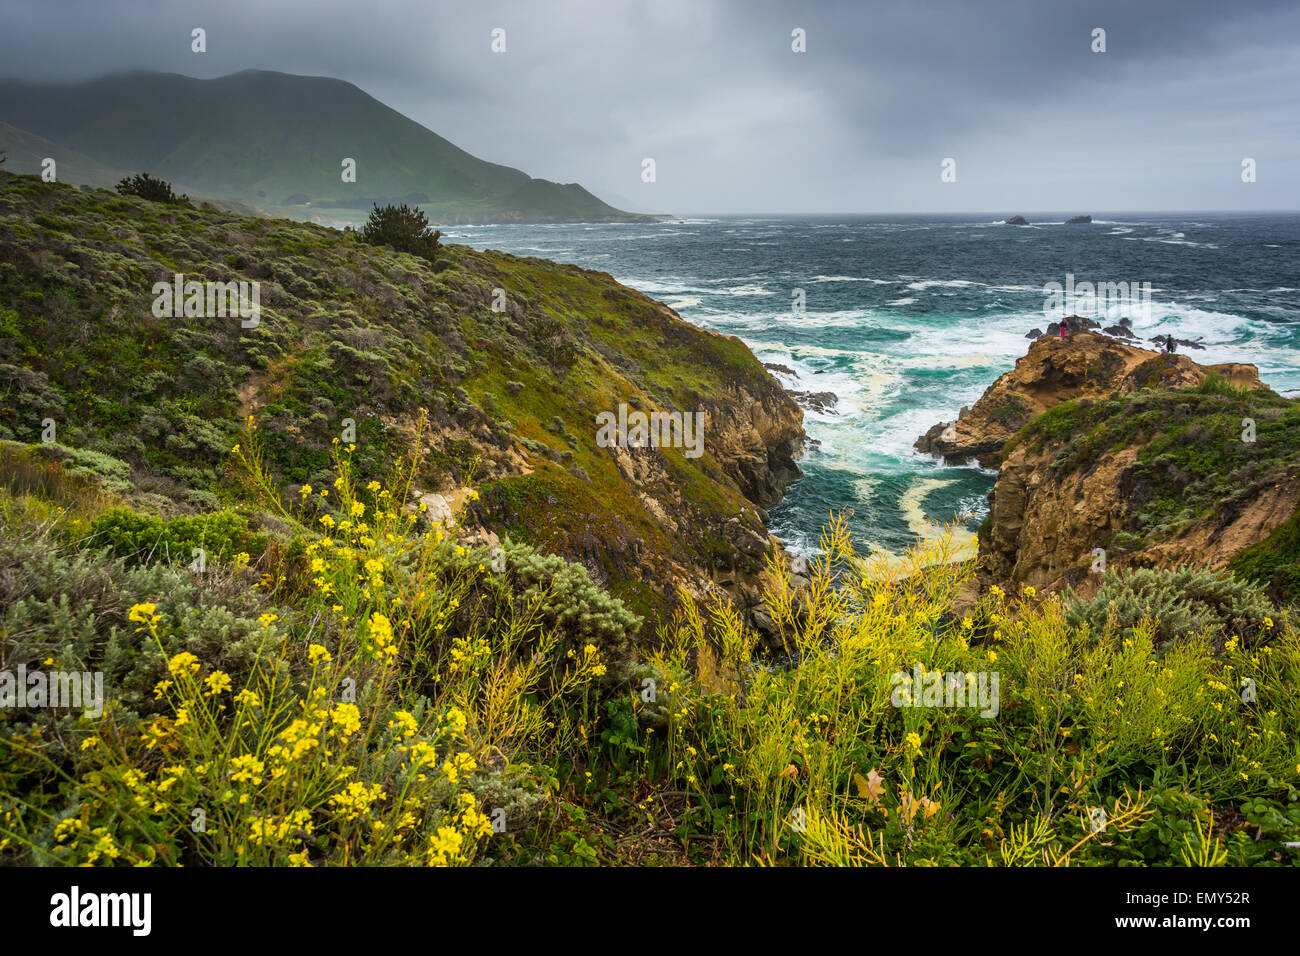 Yellow flowers and view of the Pacific Ocean at Garrapata State Park, California. Stock Photo